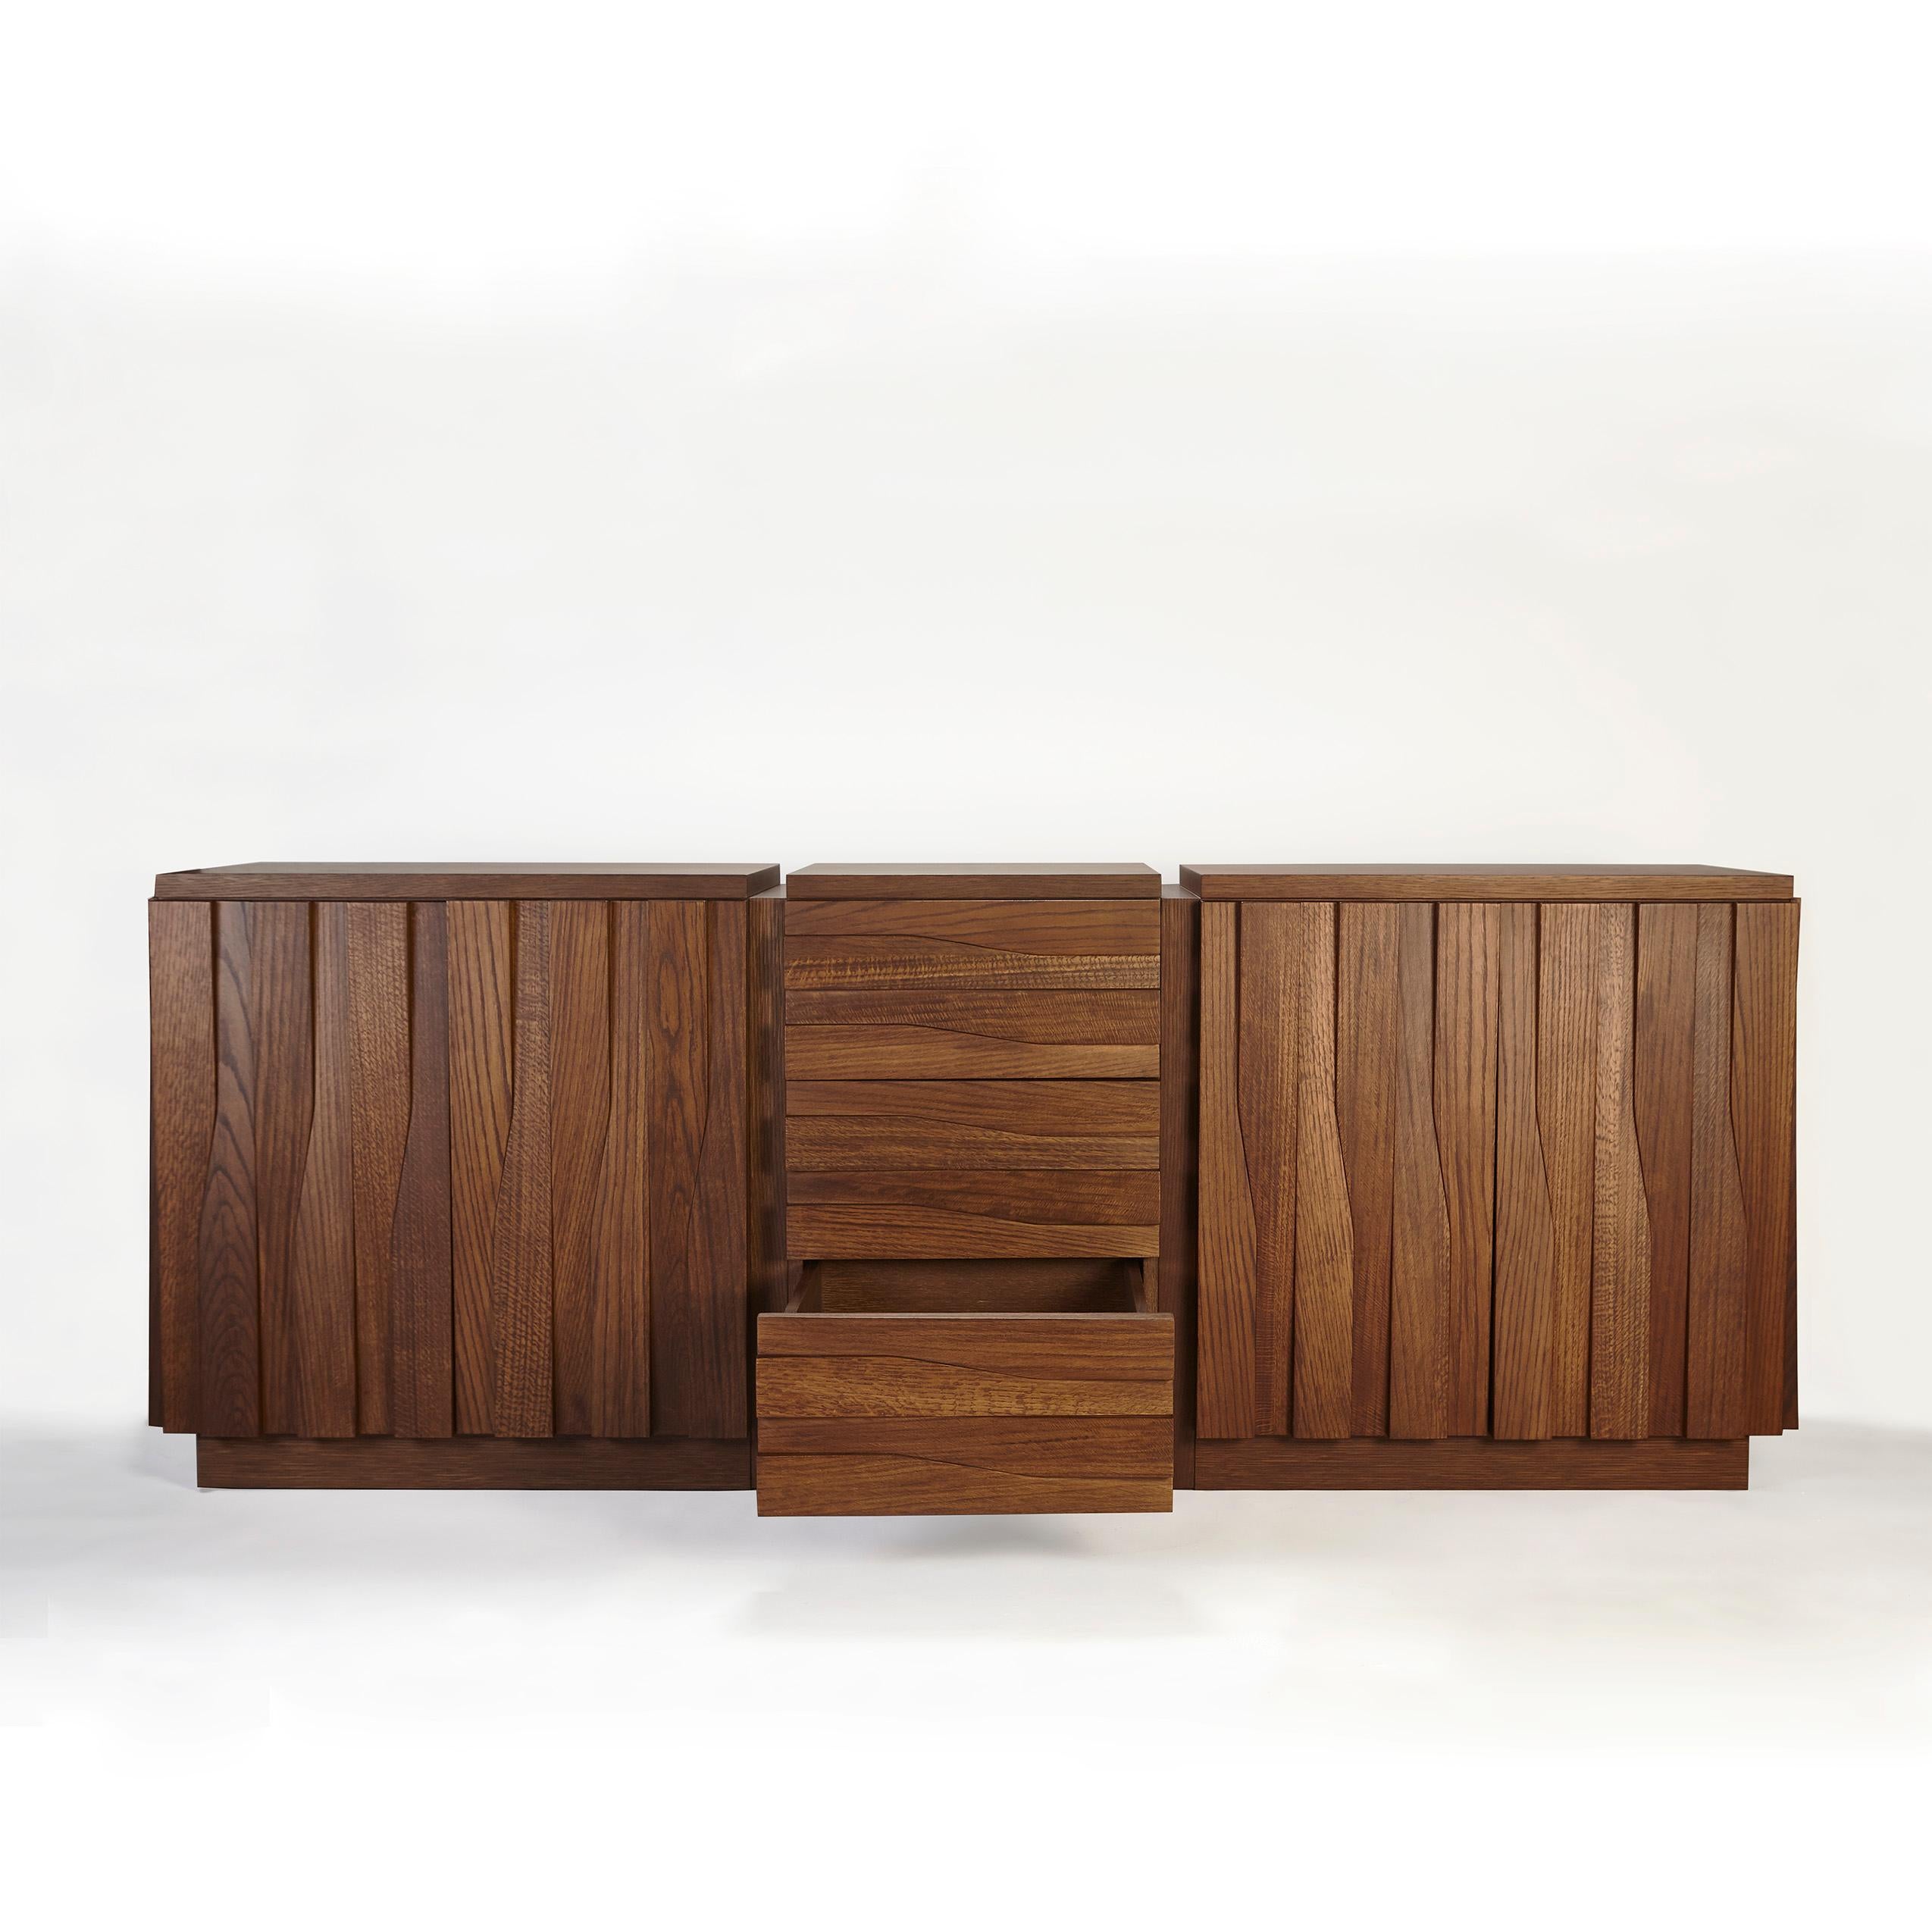 Portuguese Jacaranda Sideboard, in Stained Oak Wood, Handcrafted in Portugal by Duistt For Sale